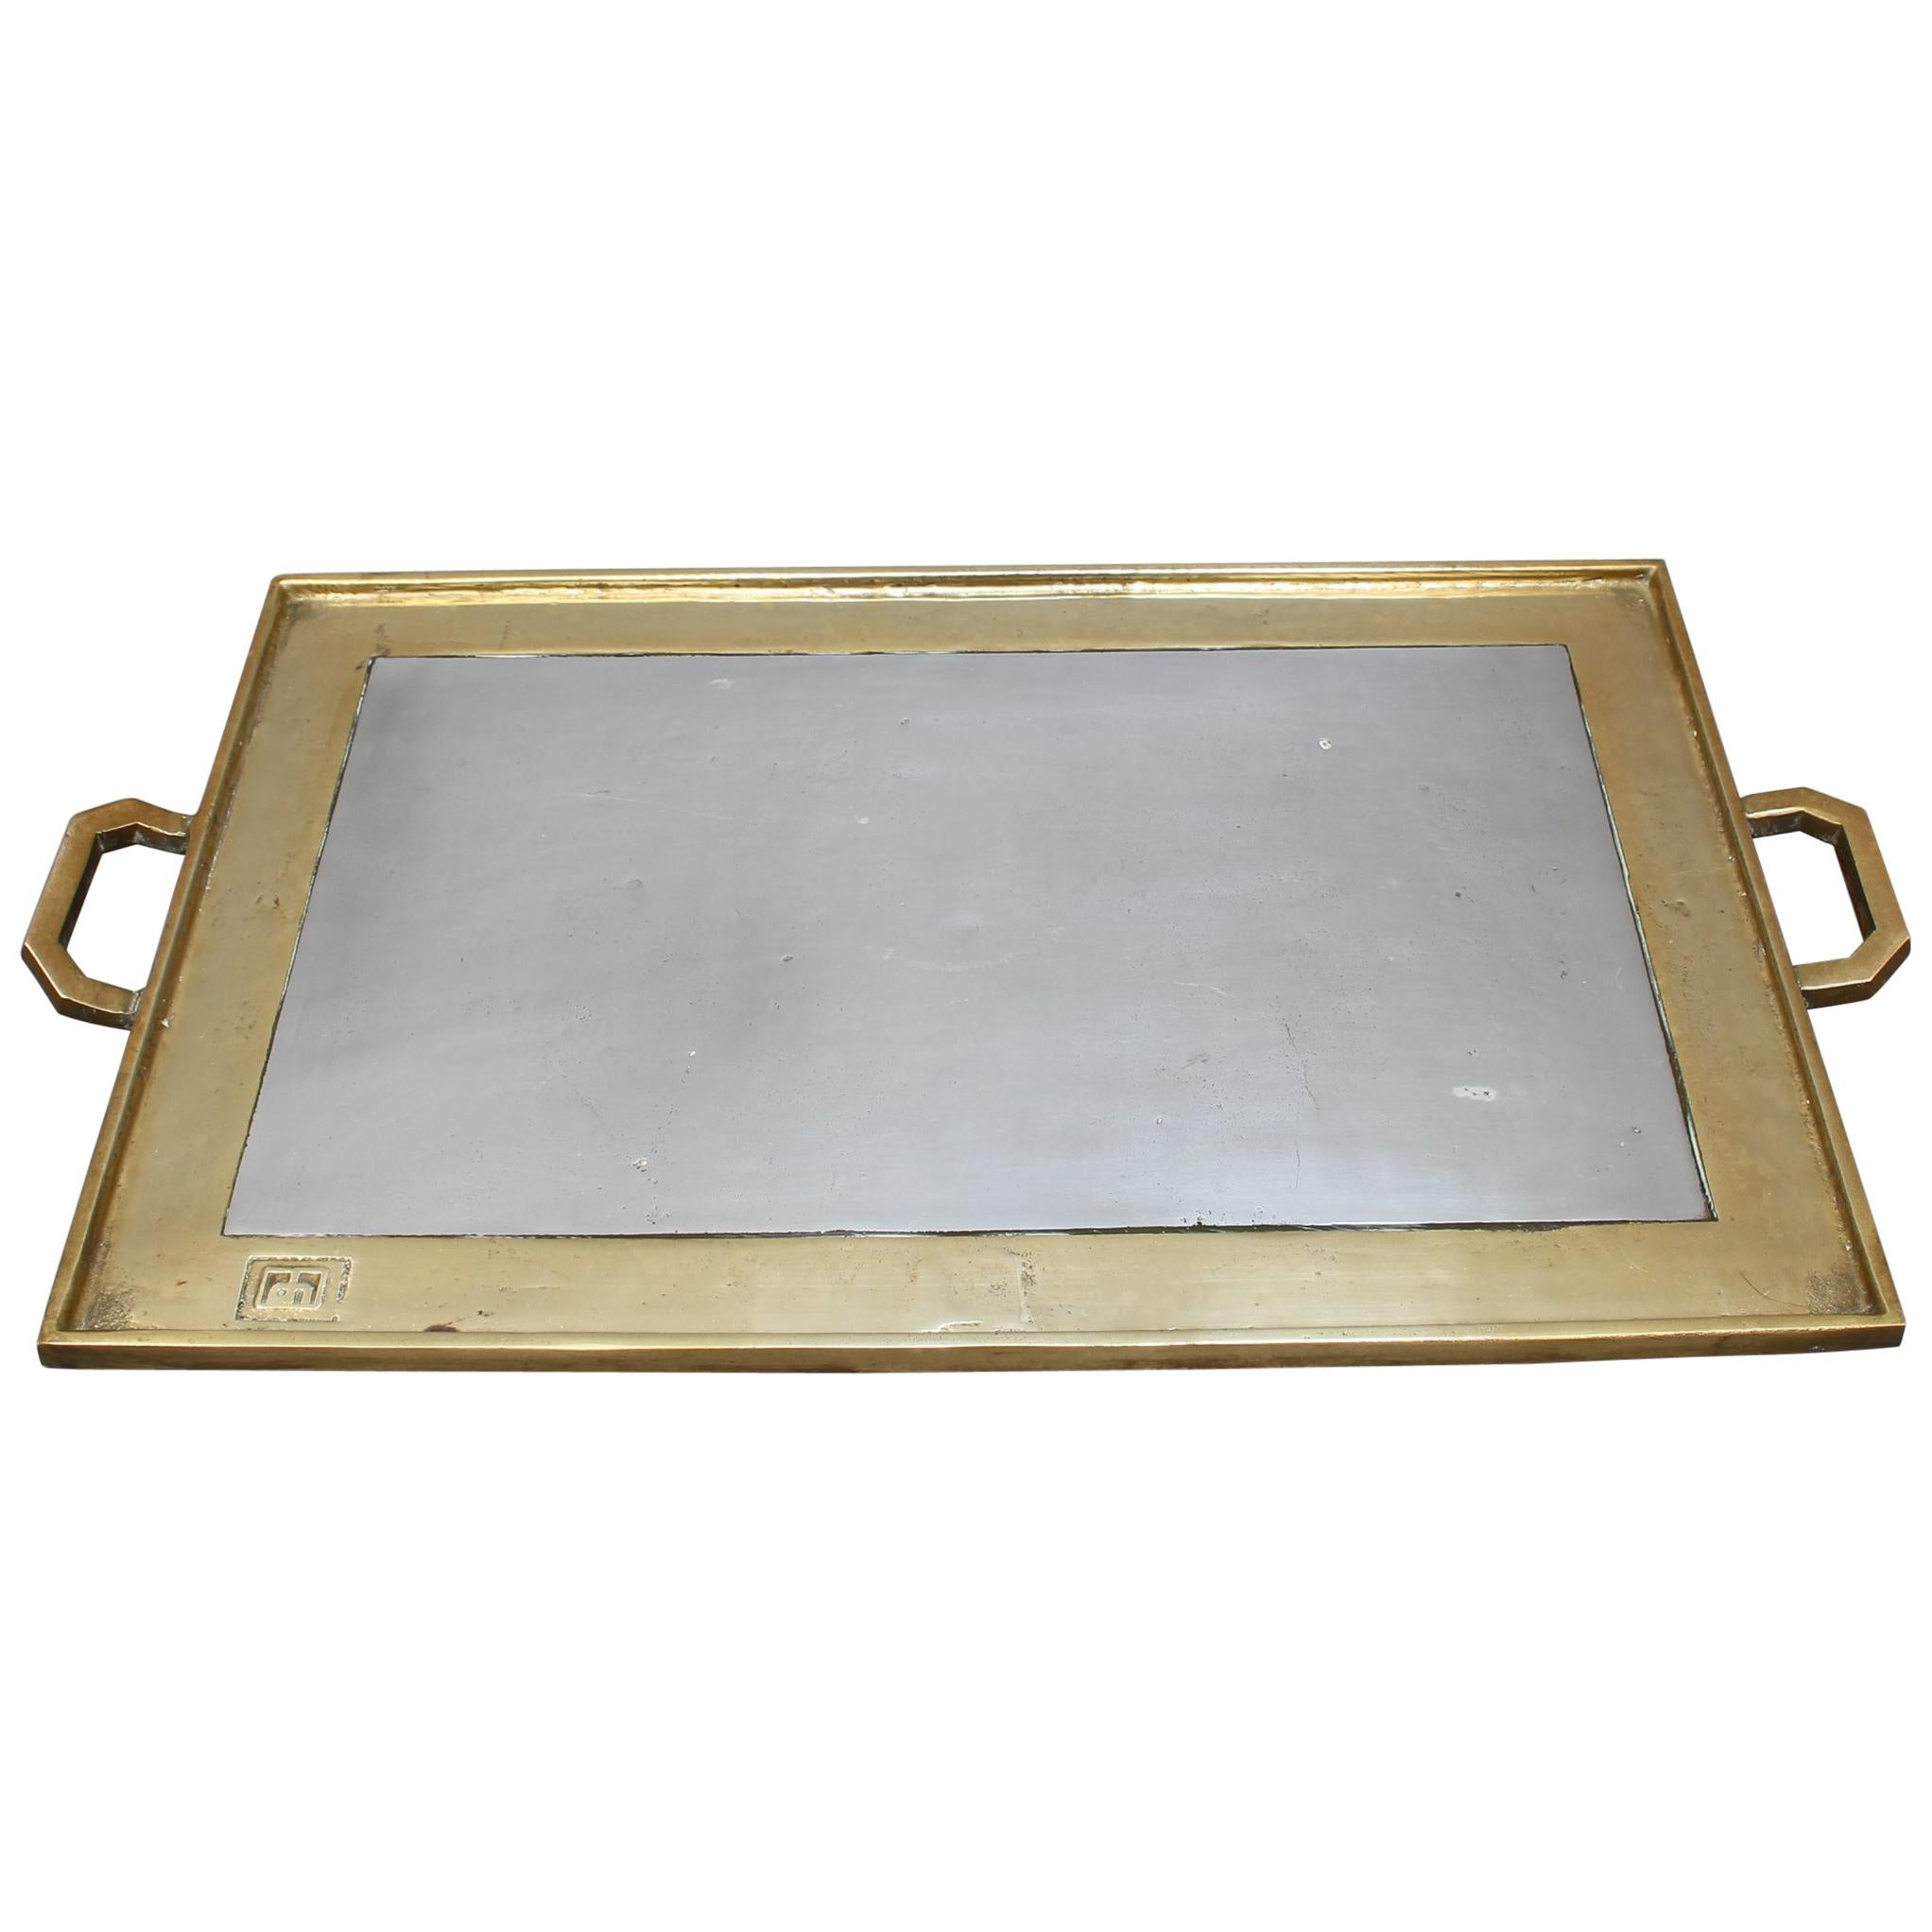 Aluminium and Brass Brutalist Style Serving Tray by David Marshall, circa 1970s